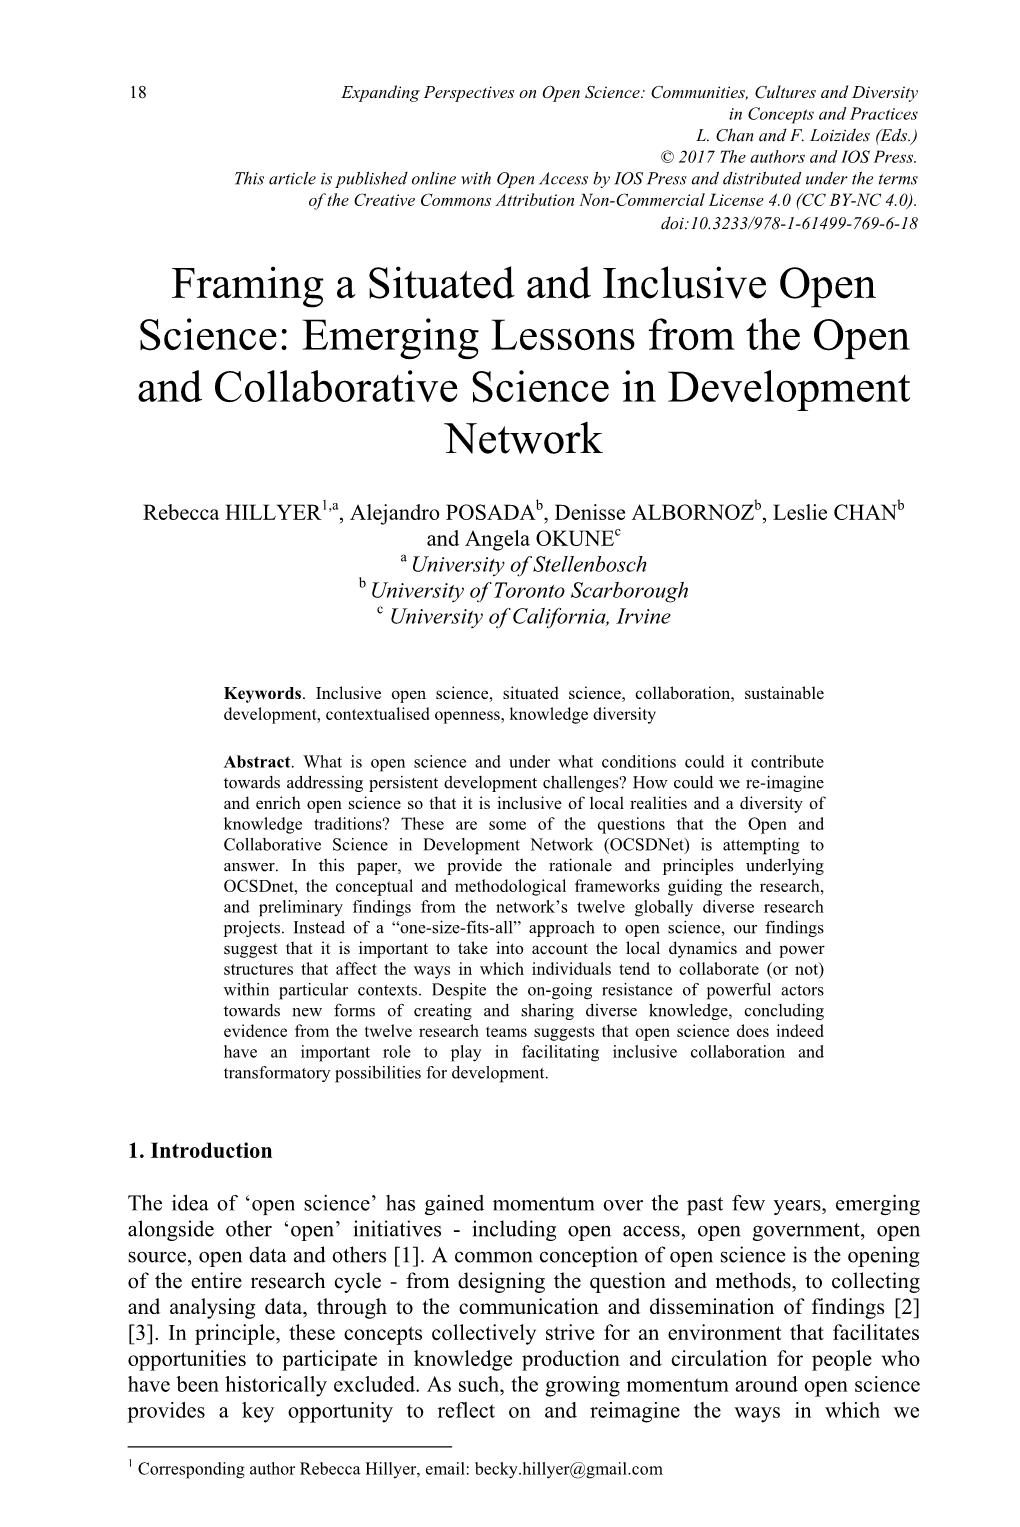 Framing a Situated and Inclusive Open Science: Emerging Lessons from the Open and Collaborative Science in Development Network